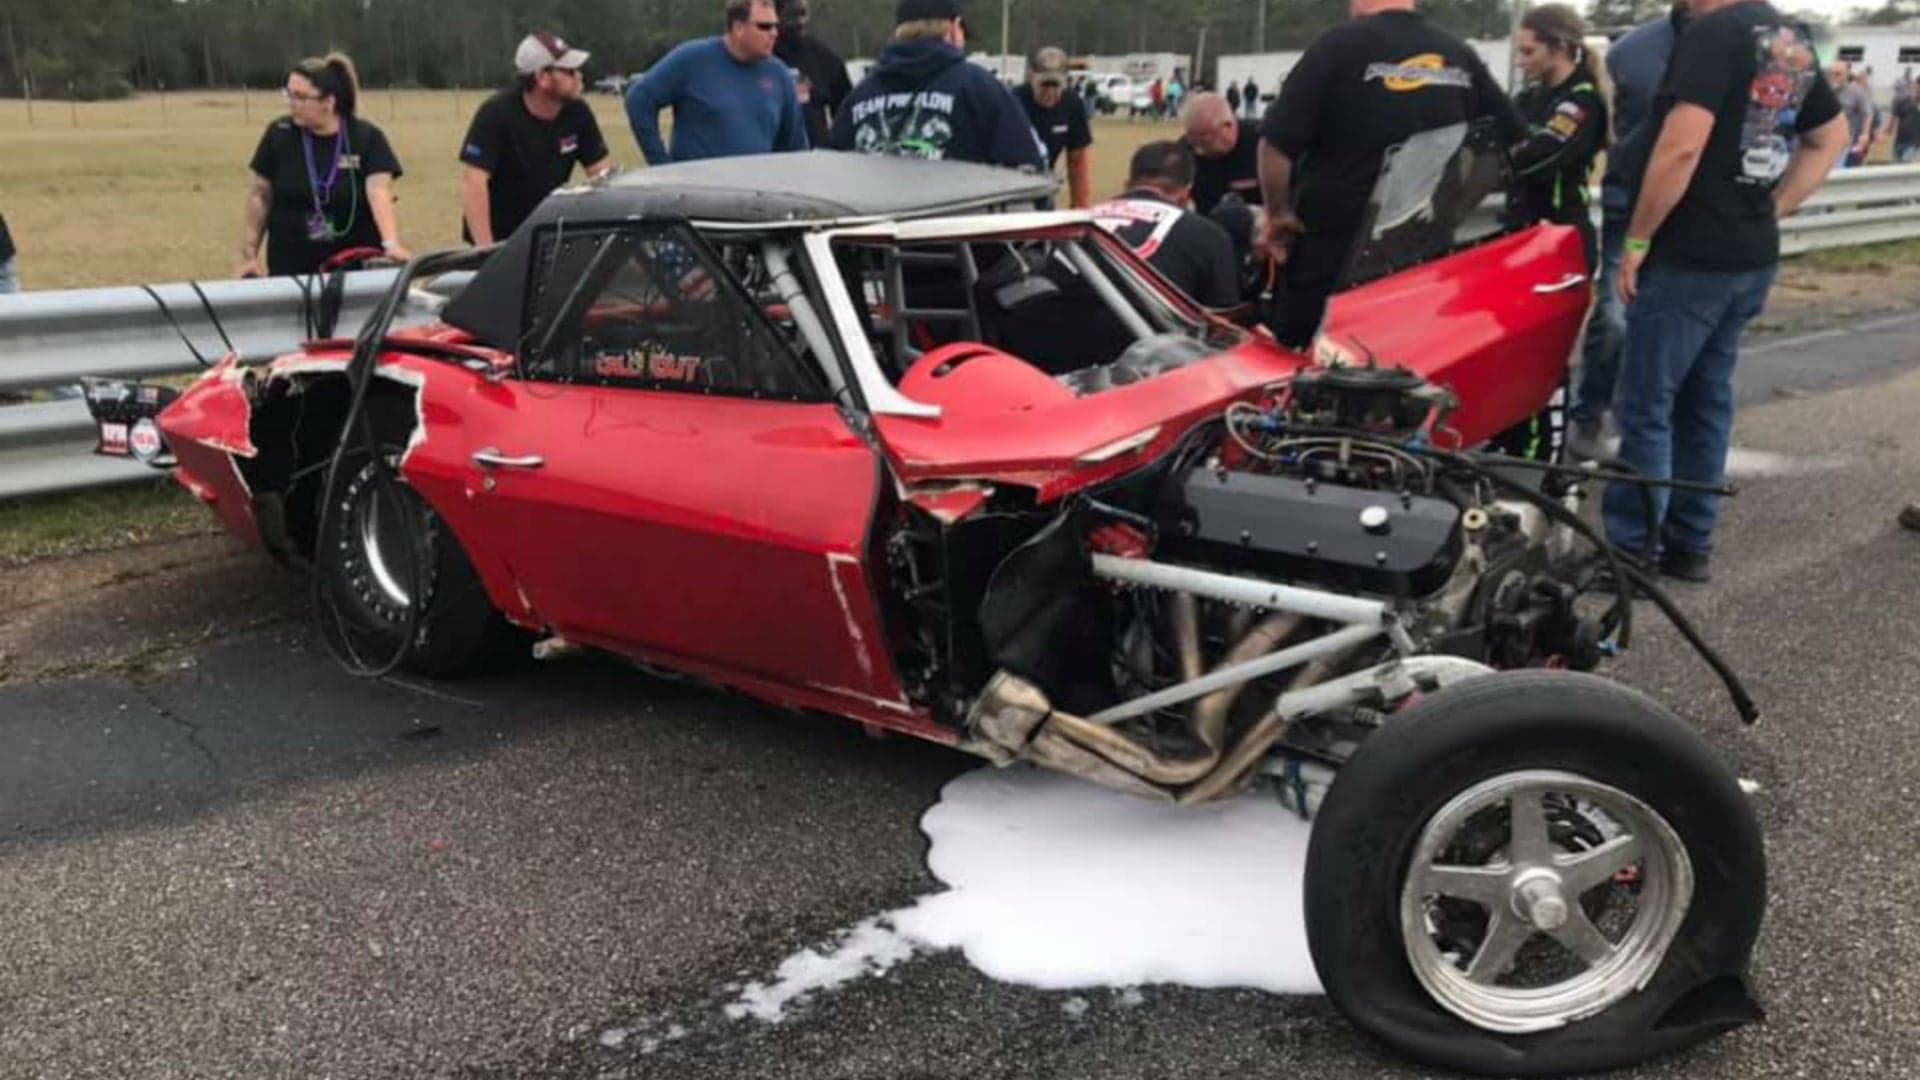 Street Outlaws Racer Walks Away From Fiery Crash in Chevy Corvette